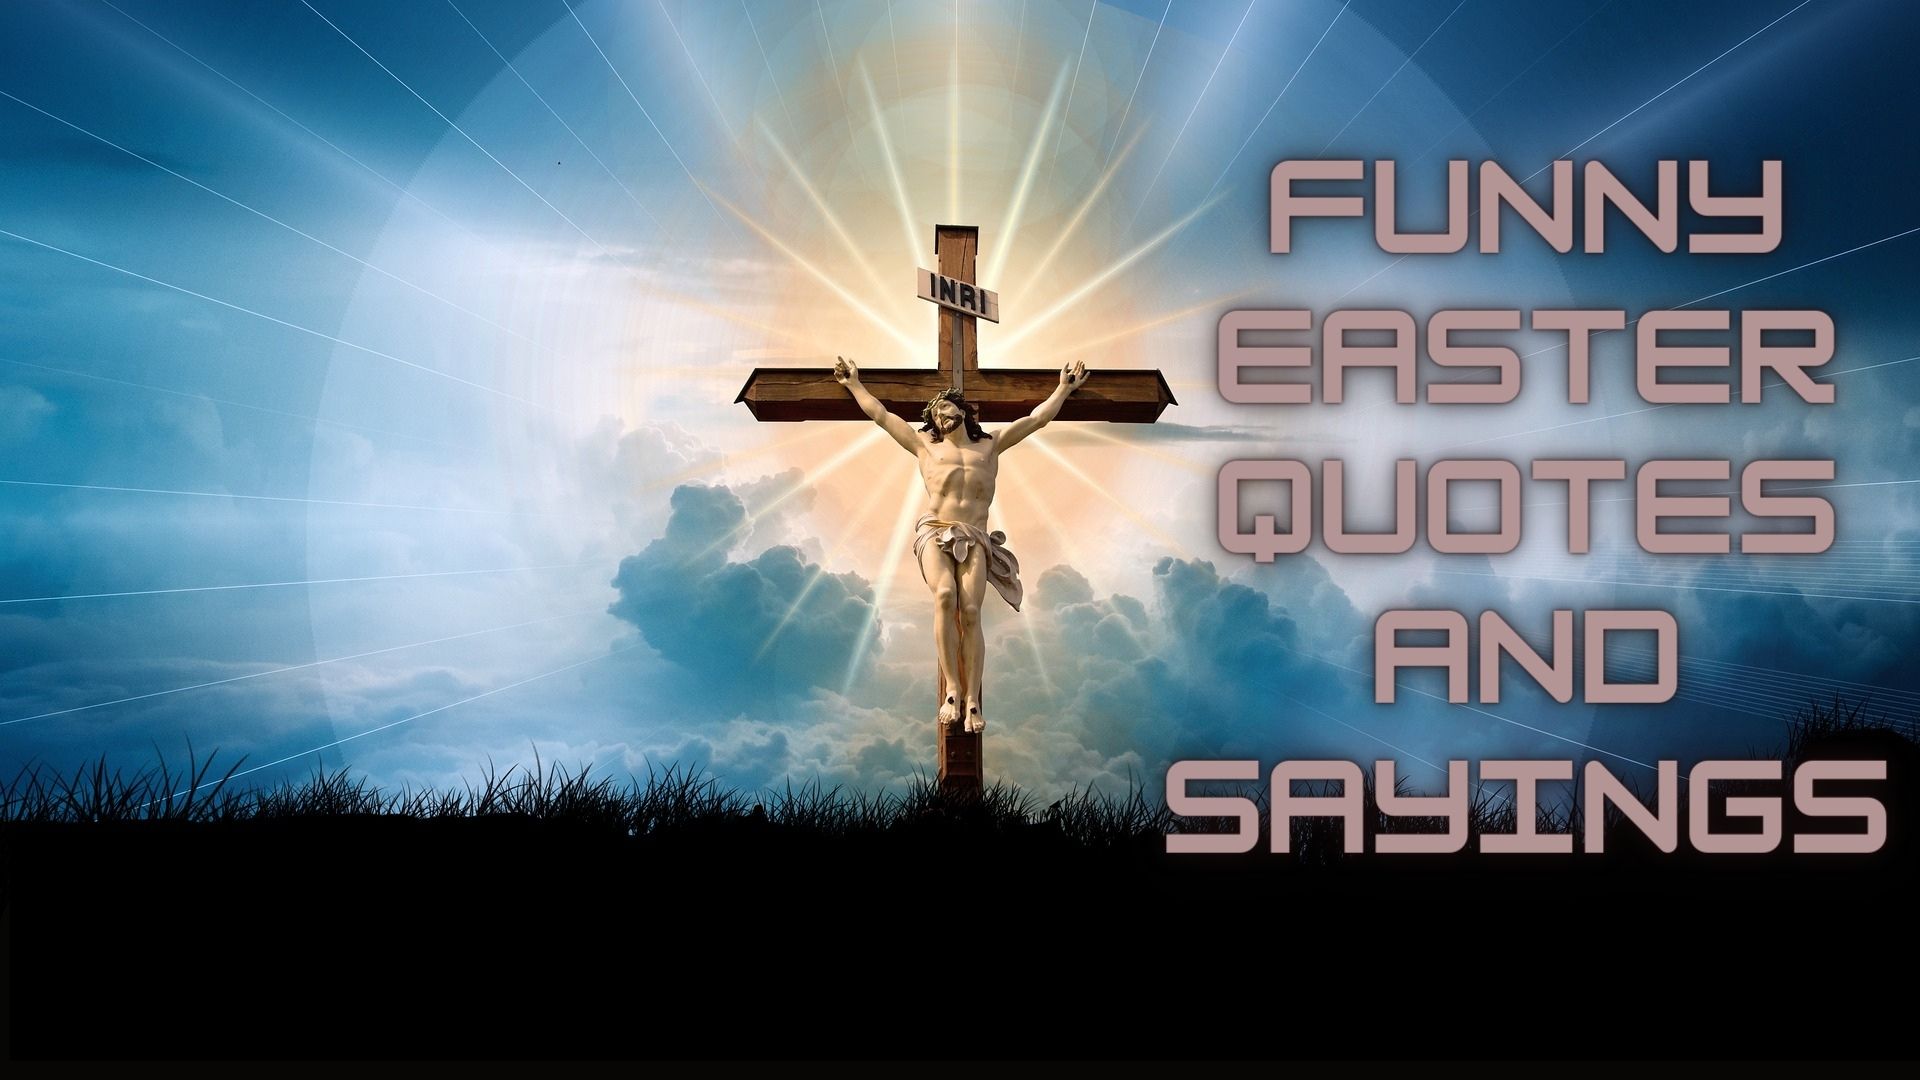 Funny Easter quotes and sayings